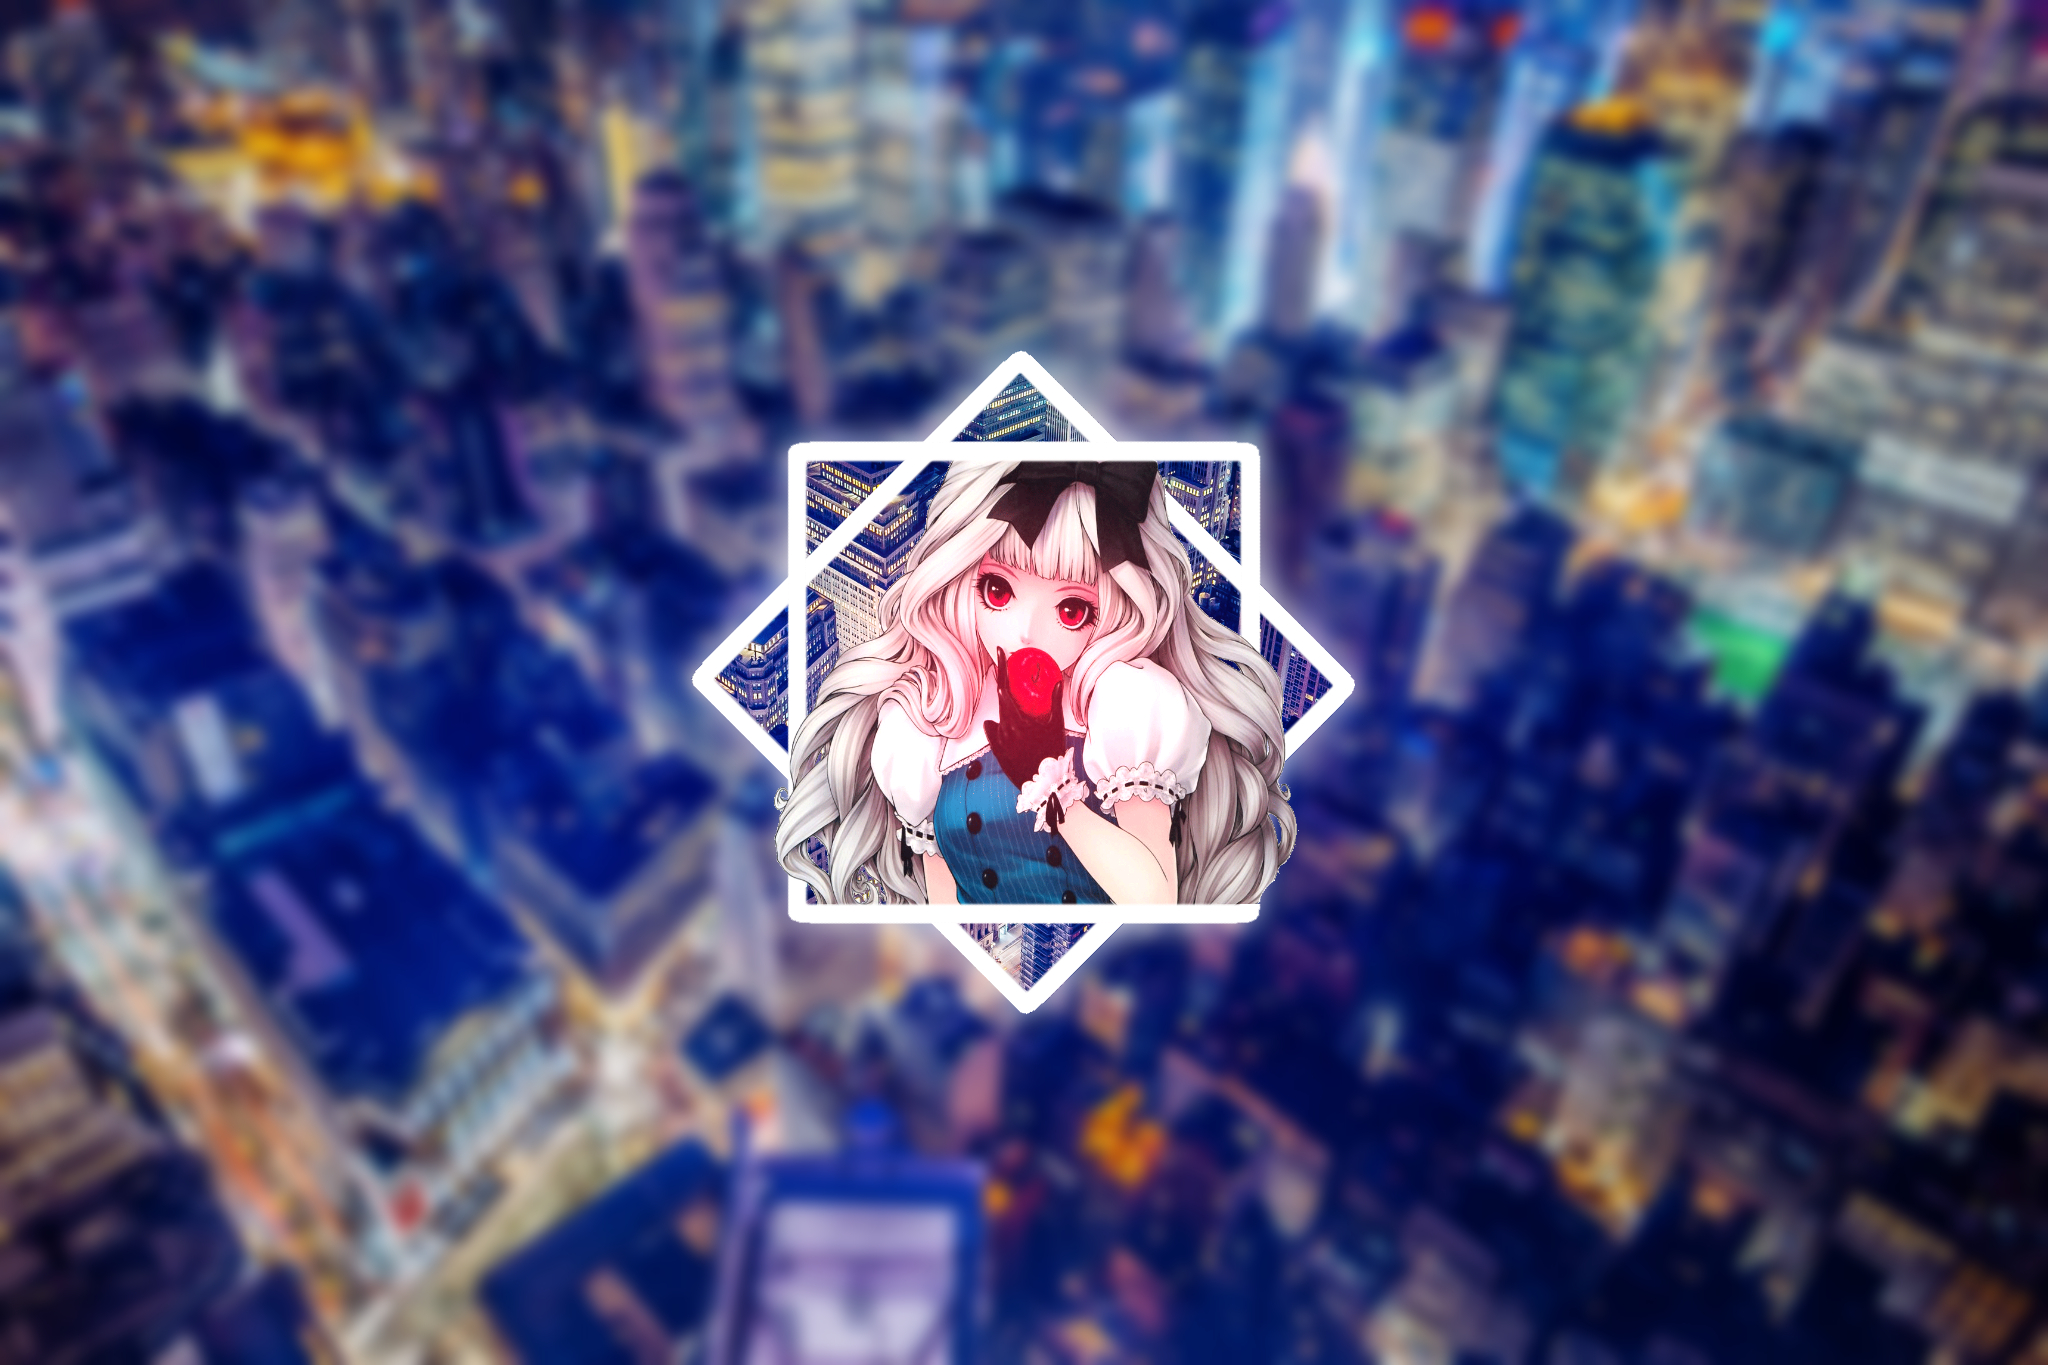 Anime 2048x1365 anime girls blurred apples cityscape picture-in-picture